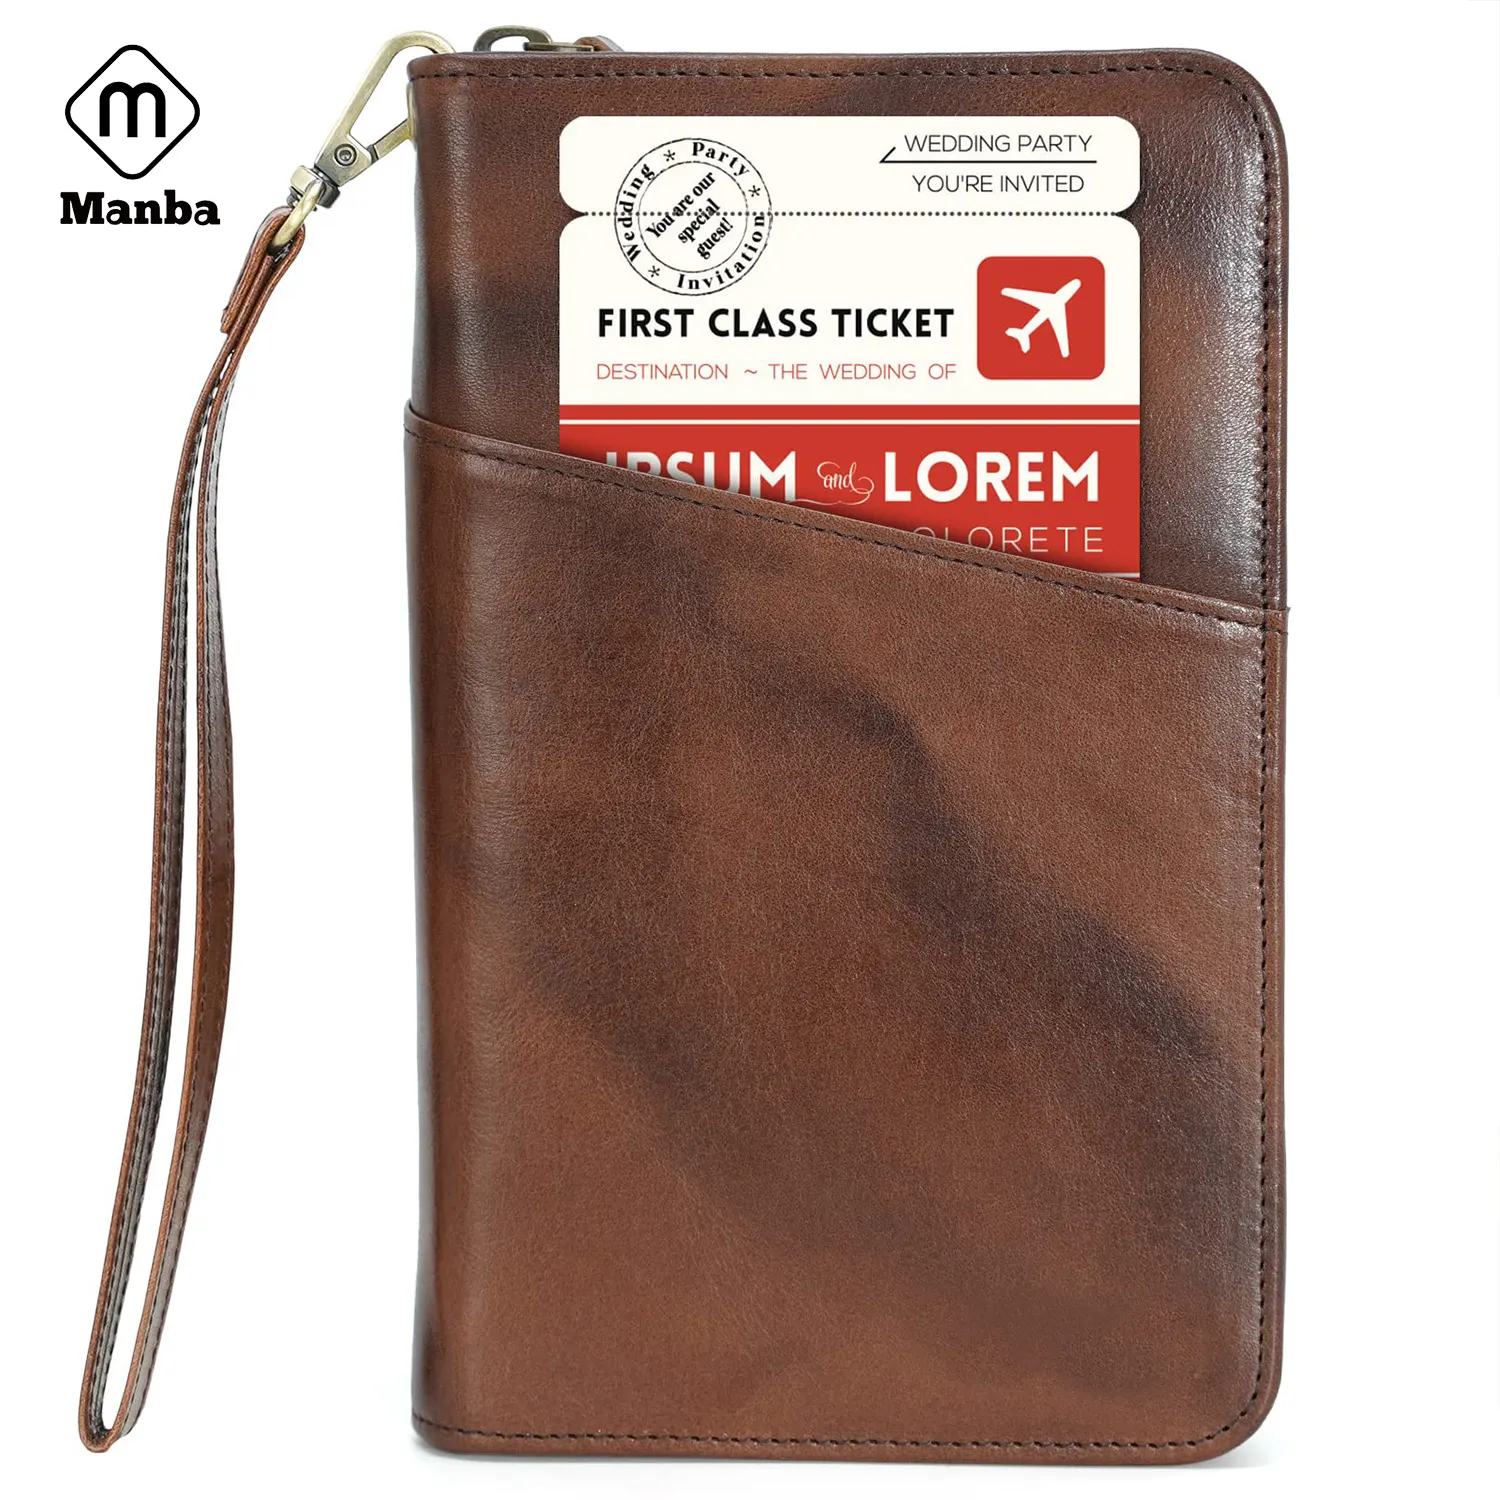 Personalized Passport Holder Leather RFID Family Passport Organizer Case Bag for Travel